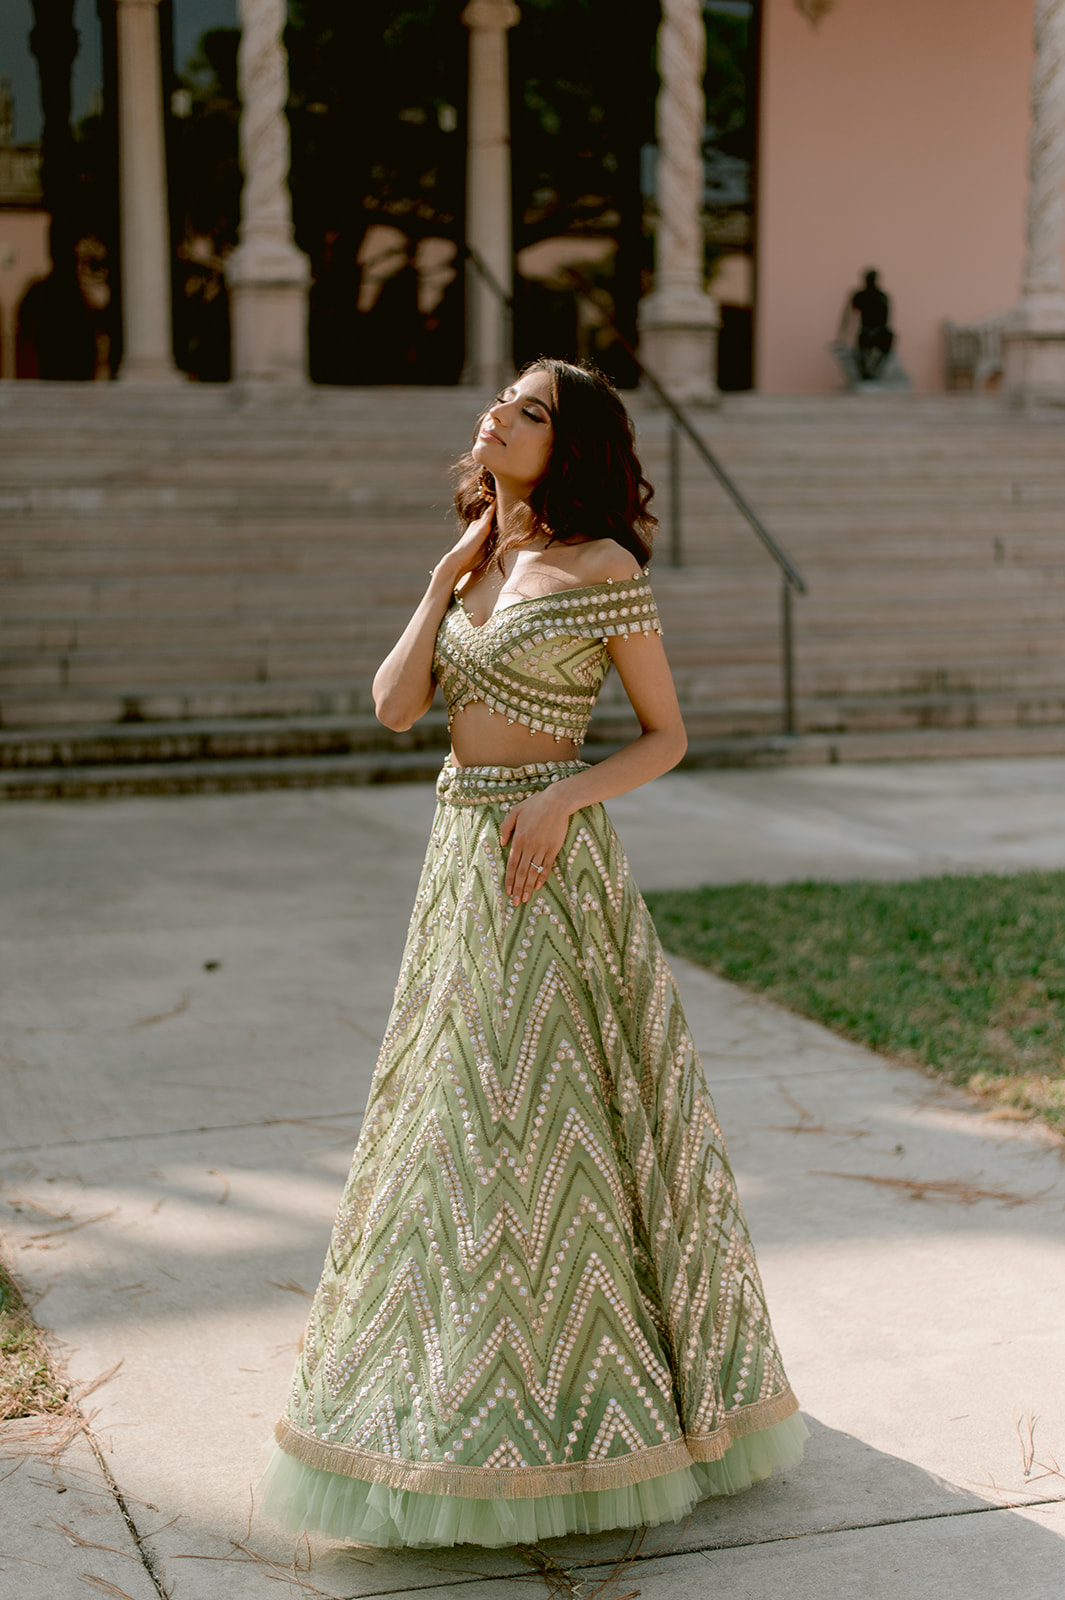 "Ringling Museum engagement shoot featuring pastel green and gold Indian outfit"
